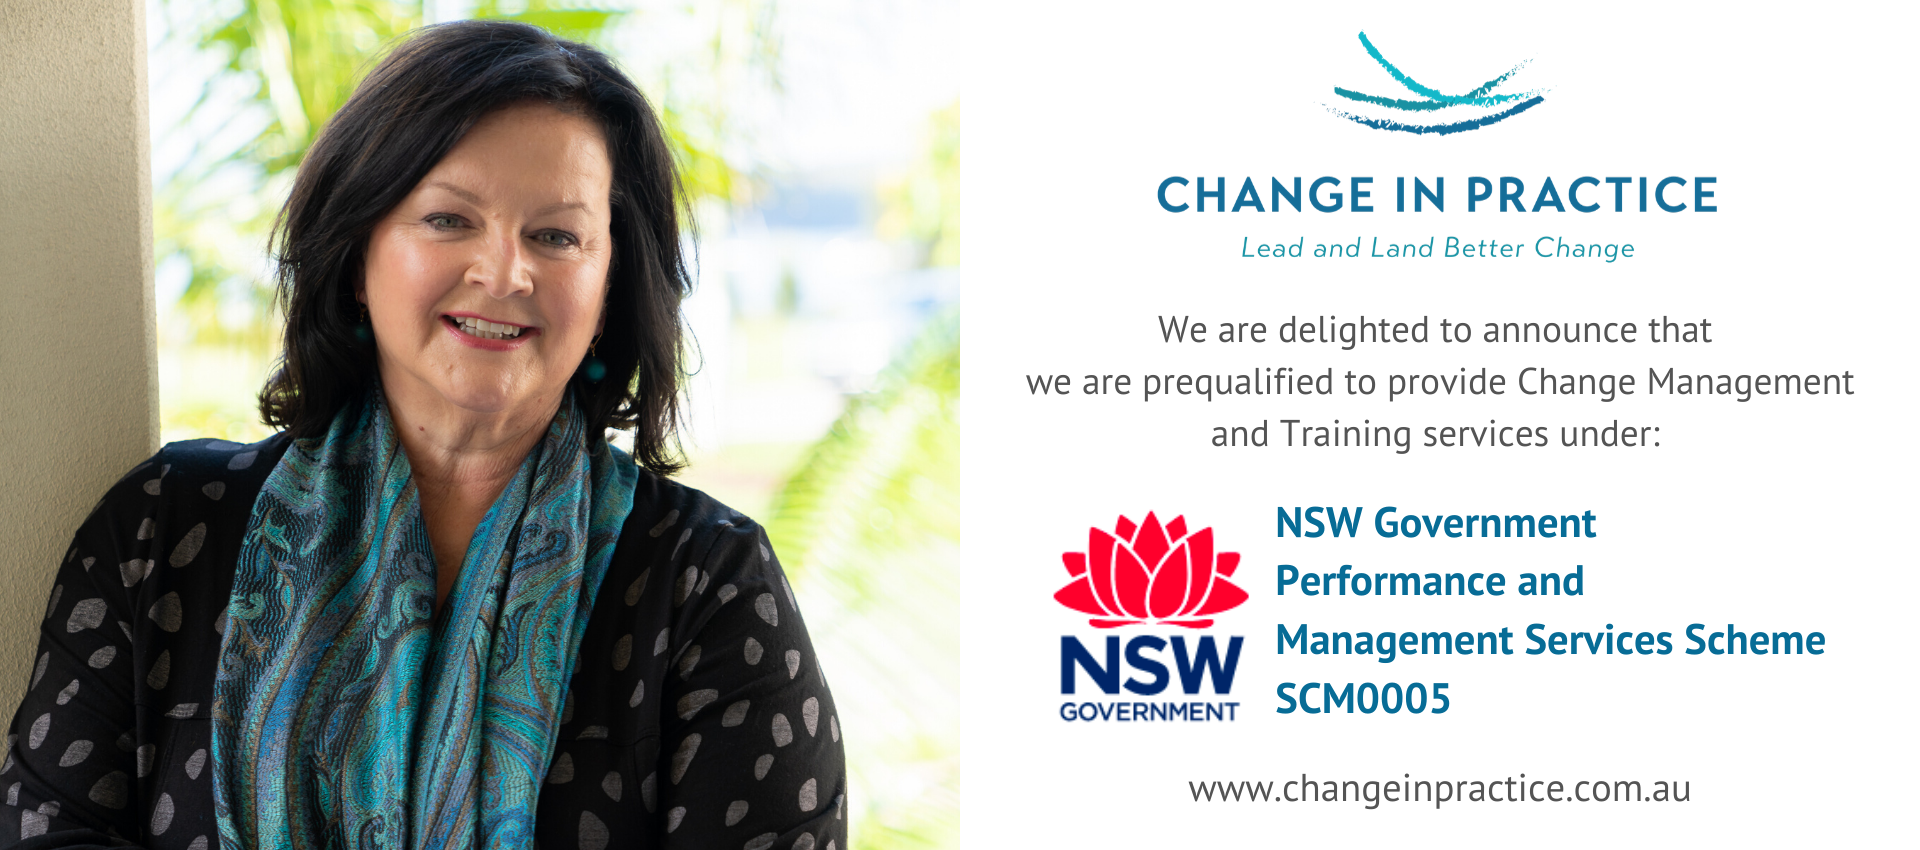 Change in Practice is prequalified for NSW Government Performance and Management Services Scheme SCM0005